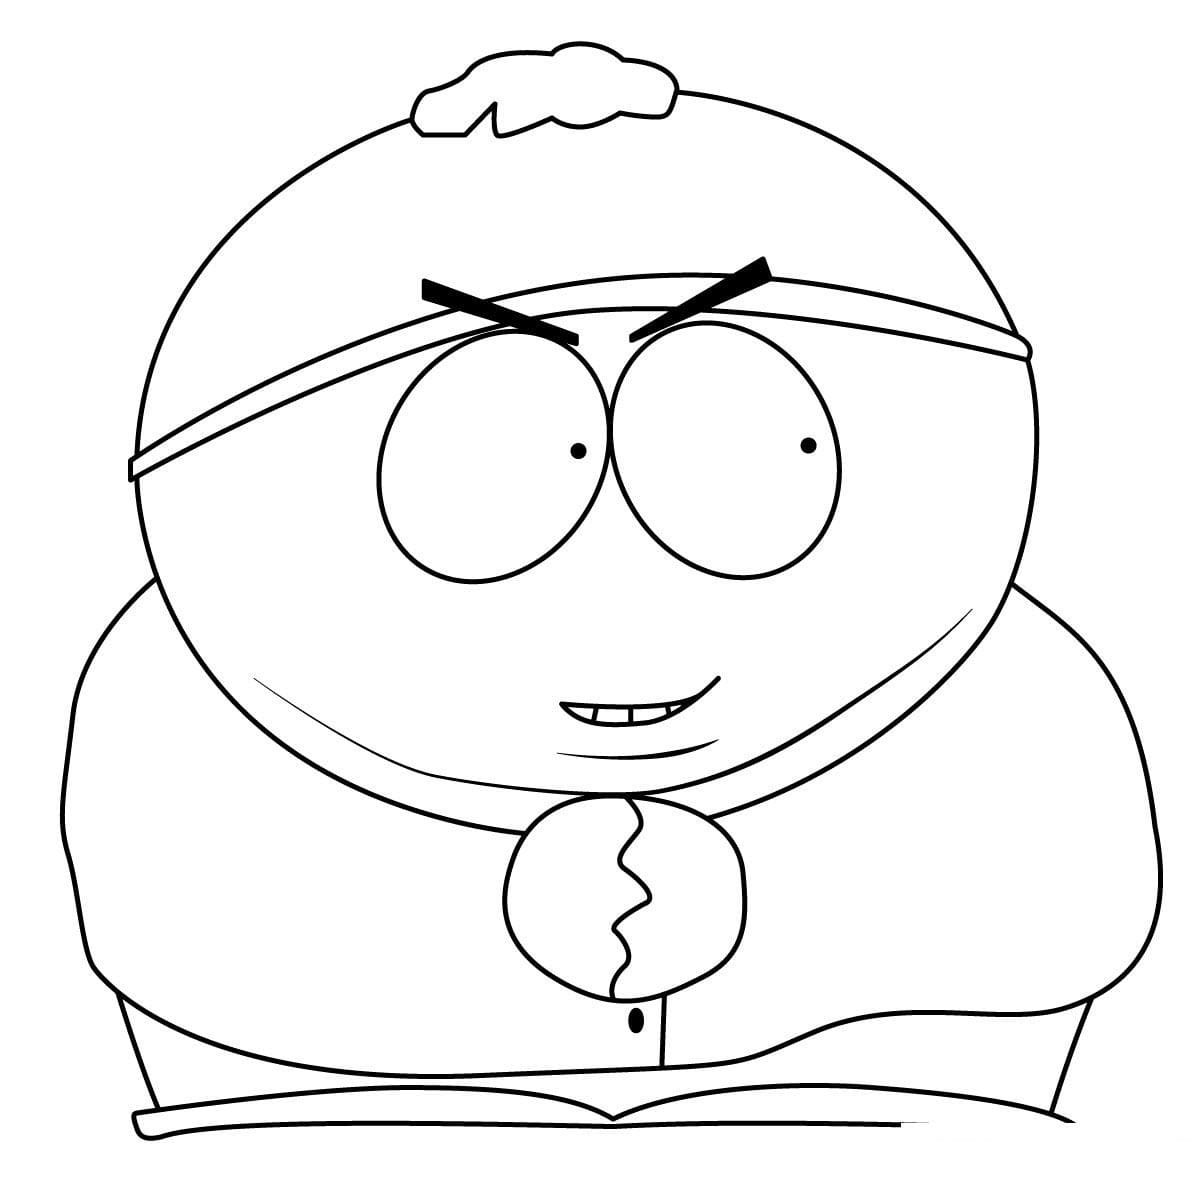 Eric cartman in south park coloring page